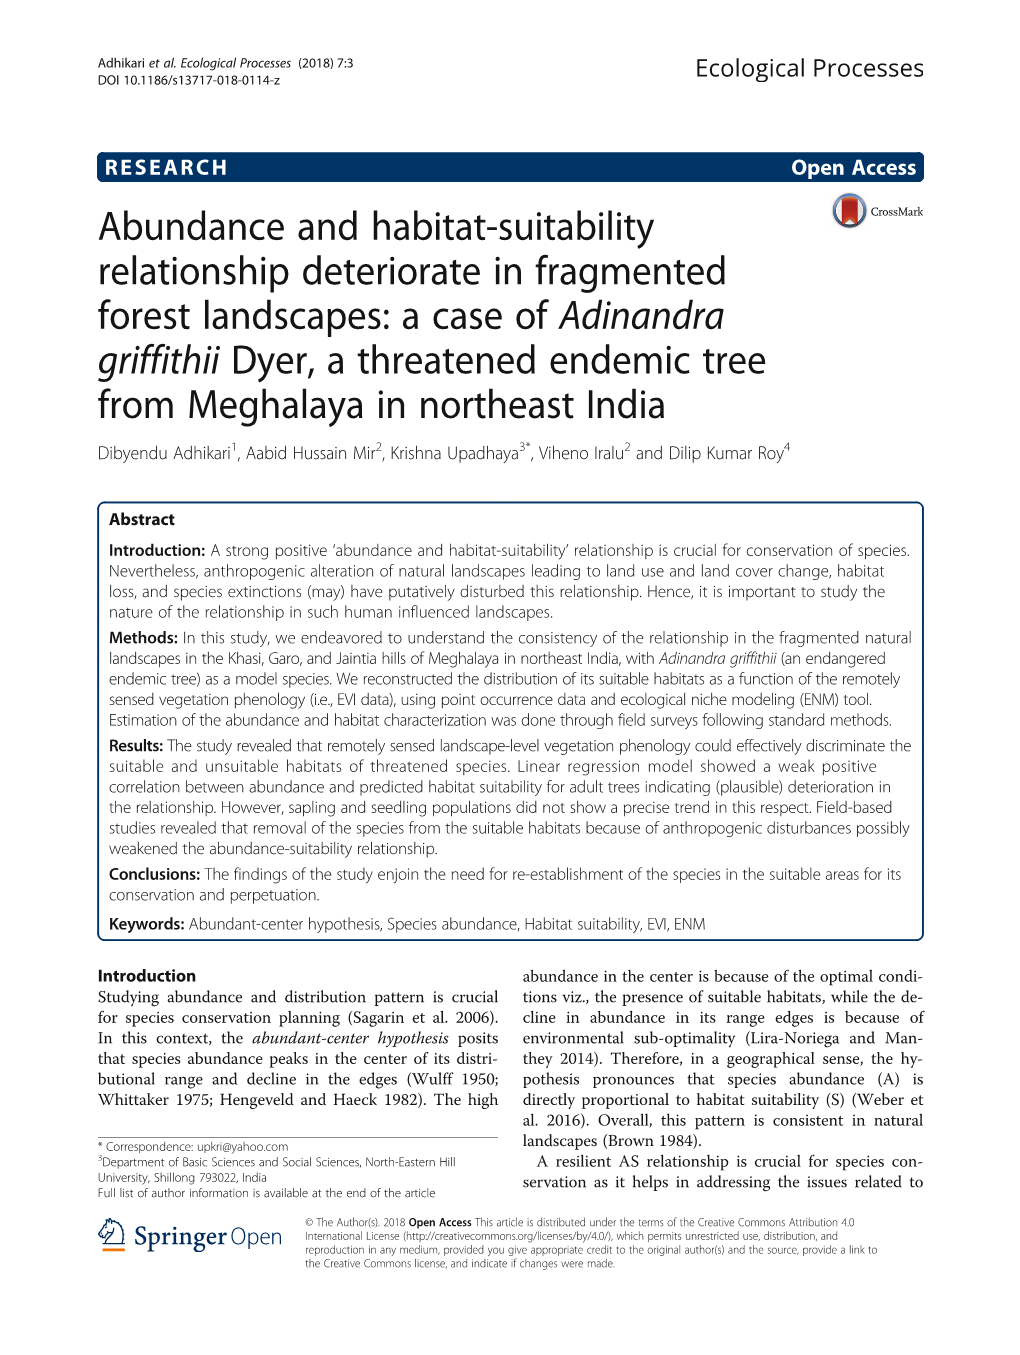 Abundance and Habitat-Suitability Relationship Deteriorate in Fragmented Forest Landscapes